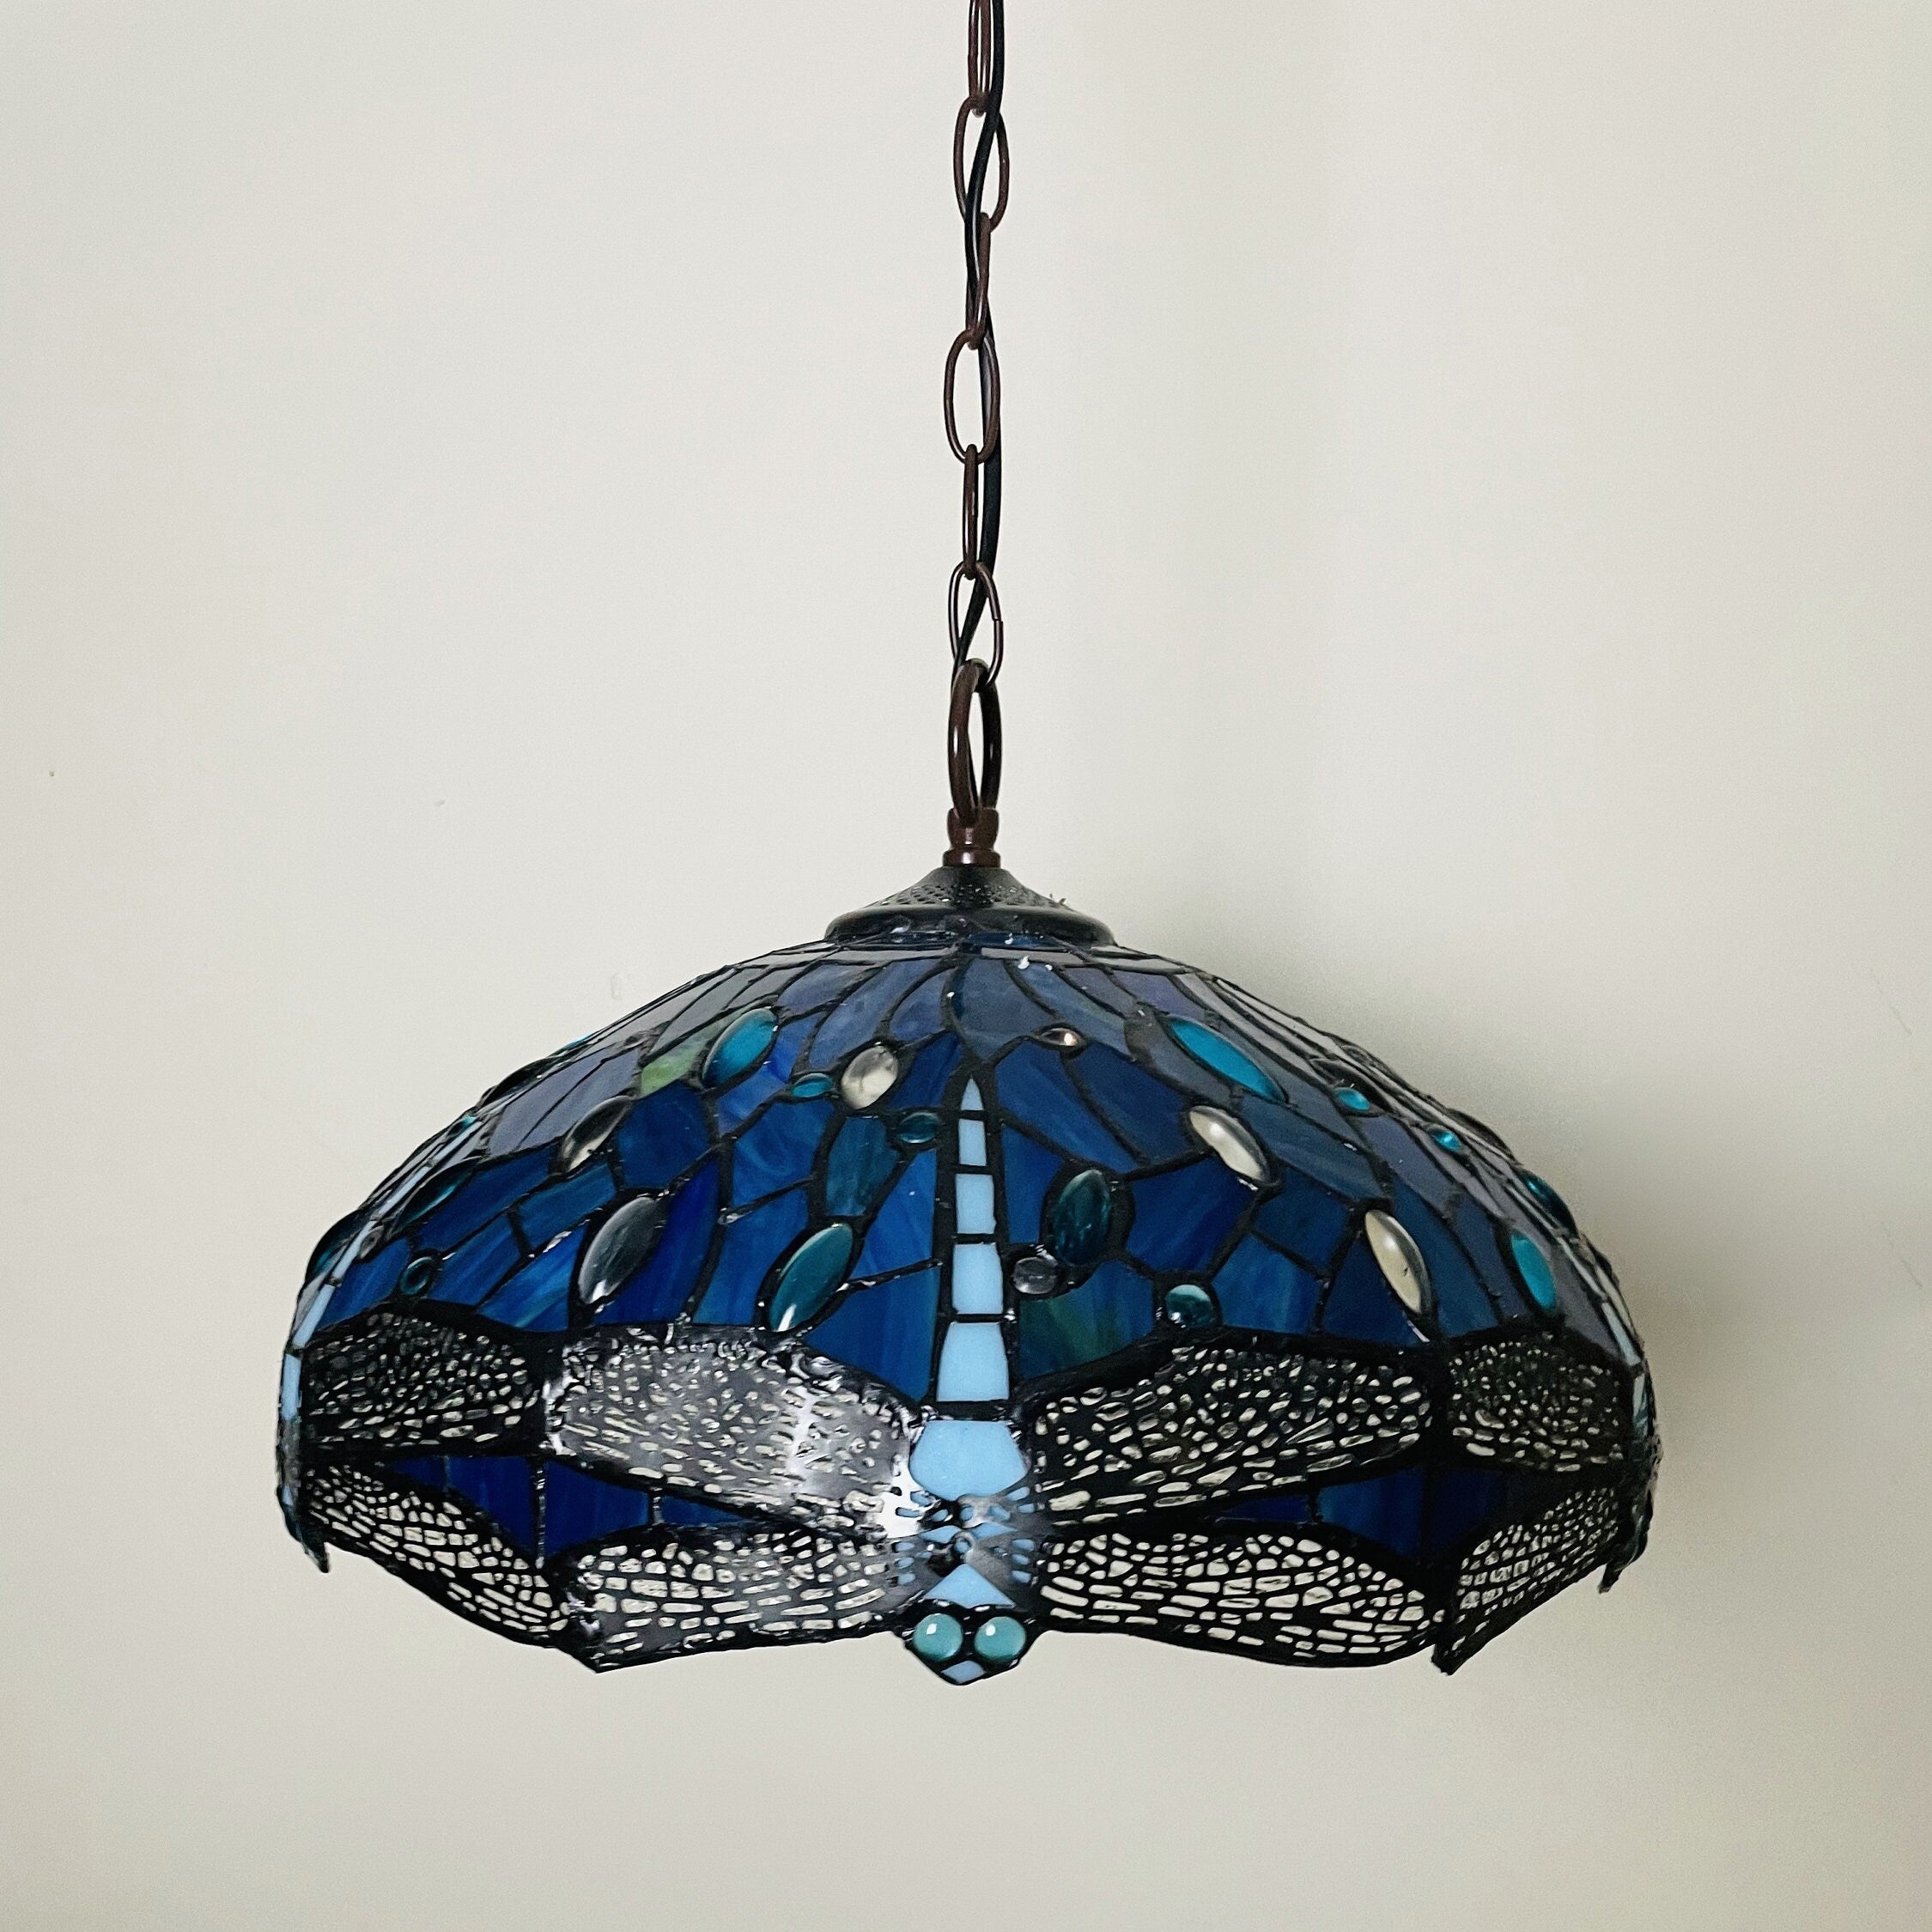 Sea Blue Dragonfly Tiffany Hanging Lamp 16in, Leadglass Stained Glass Shade, Crystal Bead Lampshade, Pendant, Chandelier, Hampton, Beach